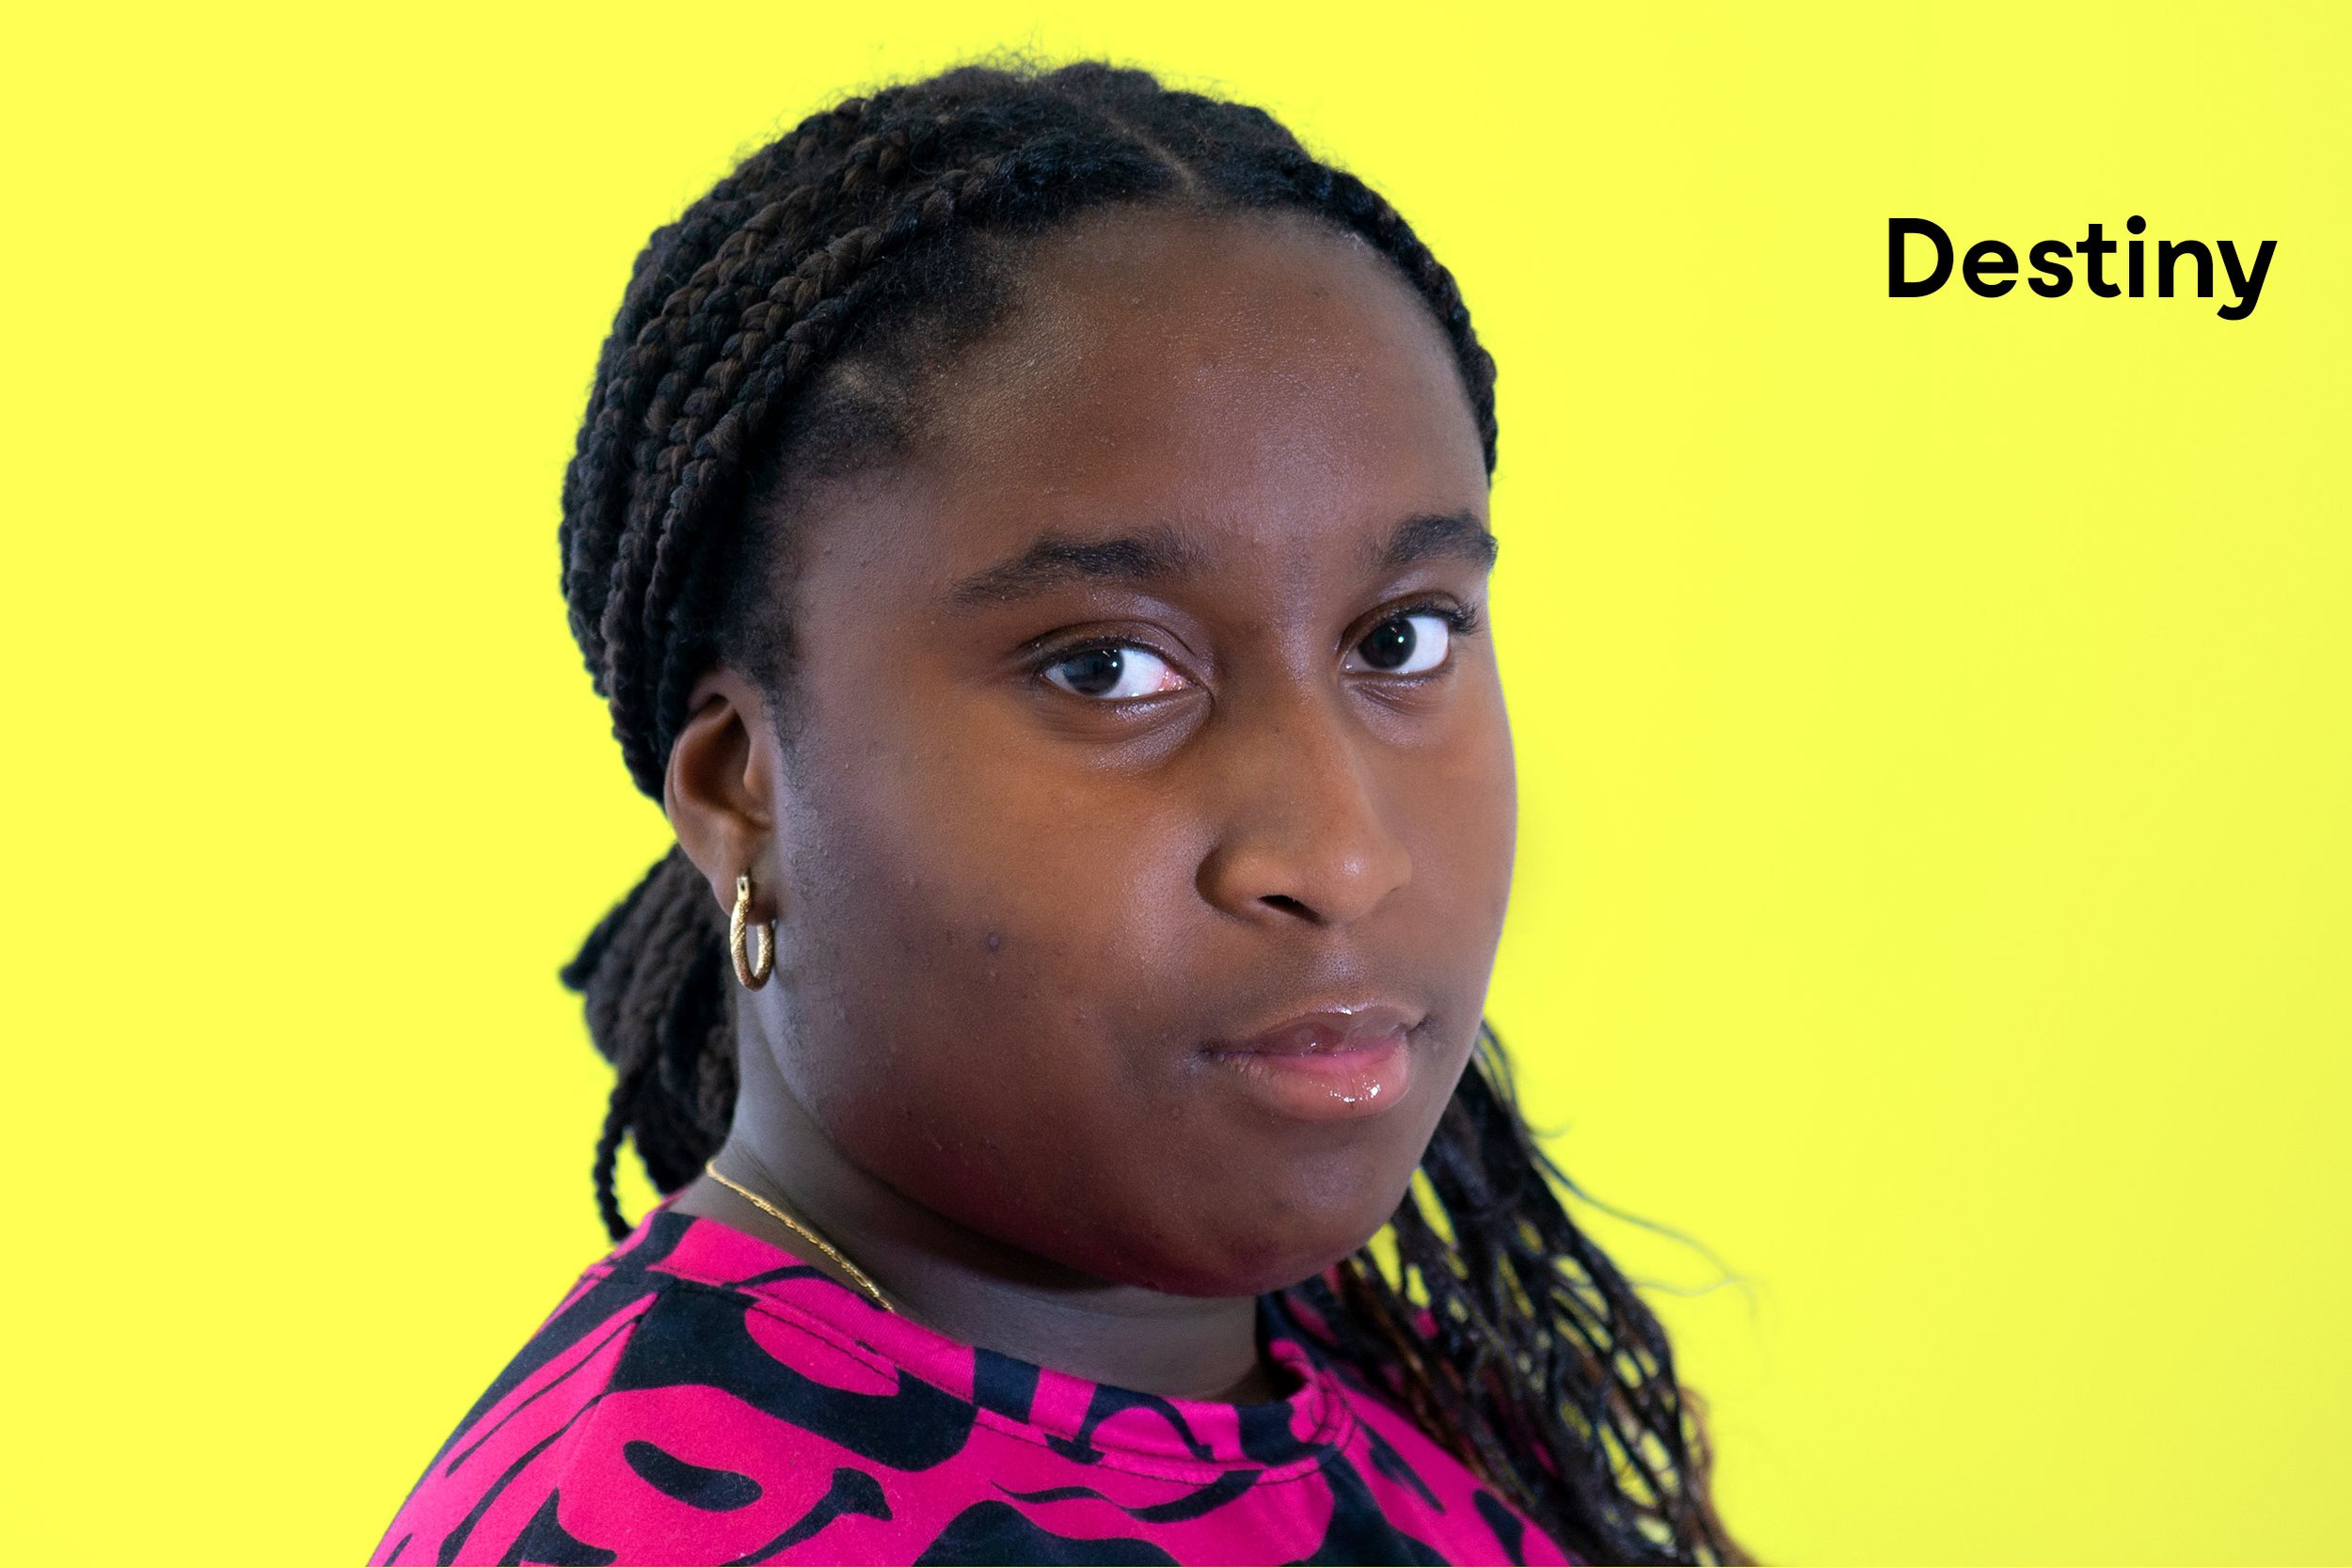  Destiny Gbaniyi (b. 2009) is a high school student at École La Voie in the borough of Côte-des-Neiges. She aspires to become a lawyer by day and a sculpture artist by night. For the time being, Destiny is focused on continuing to win her dancing and